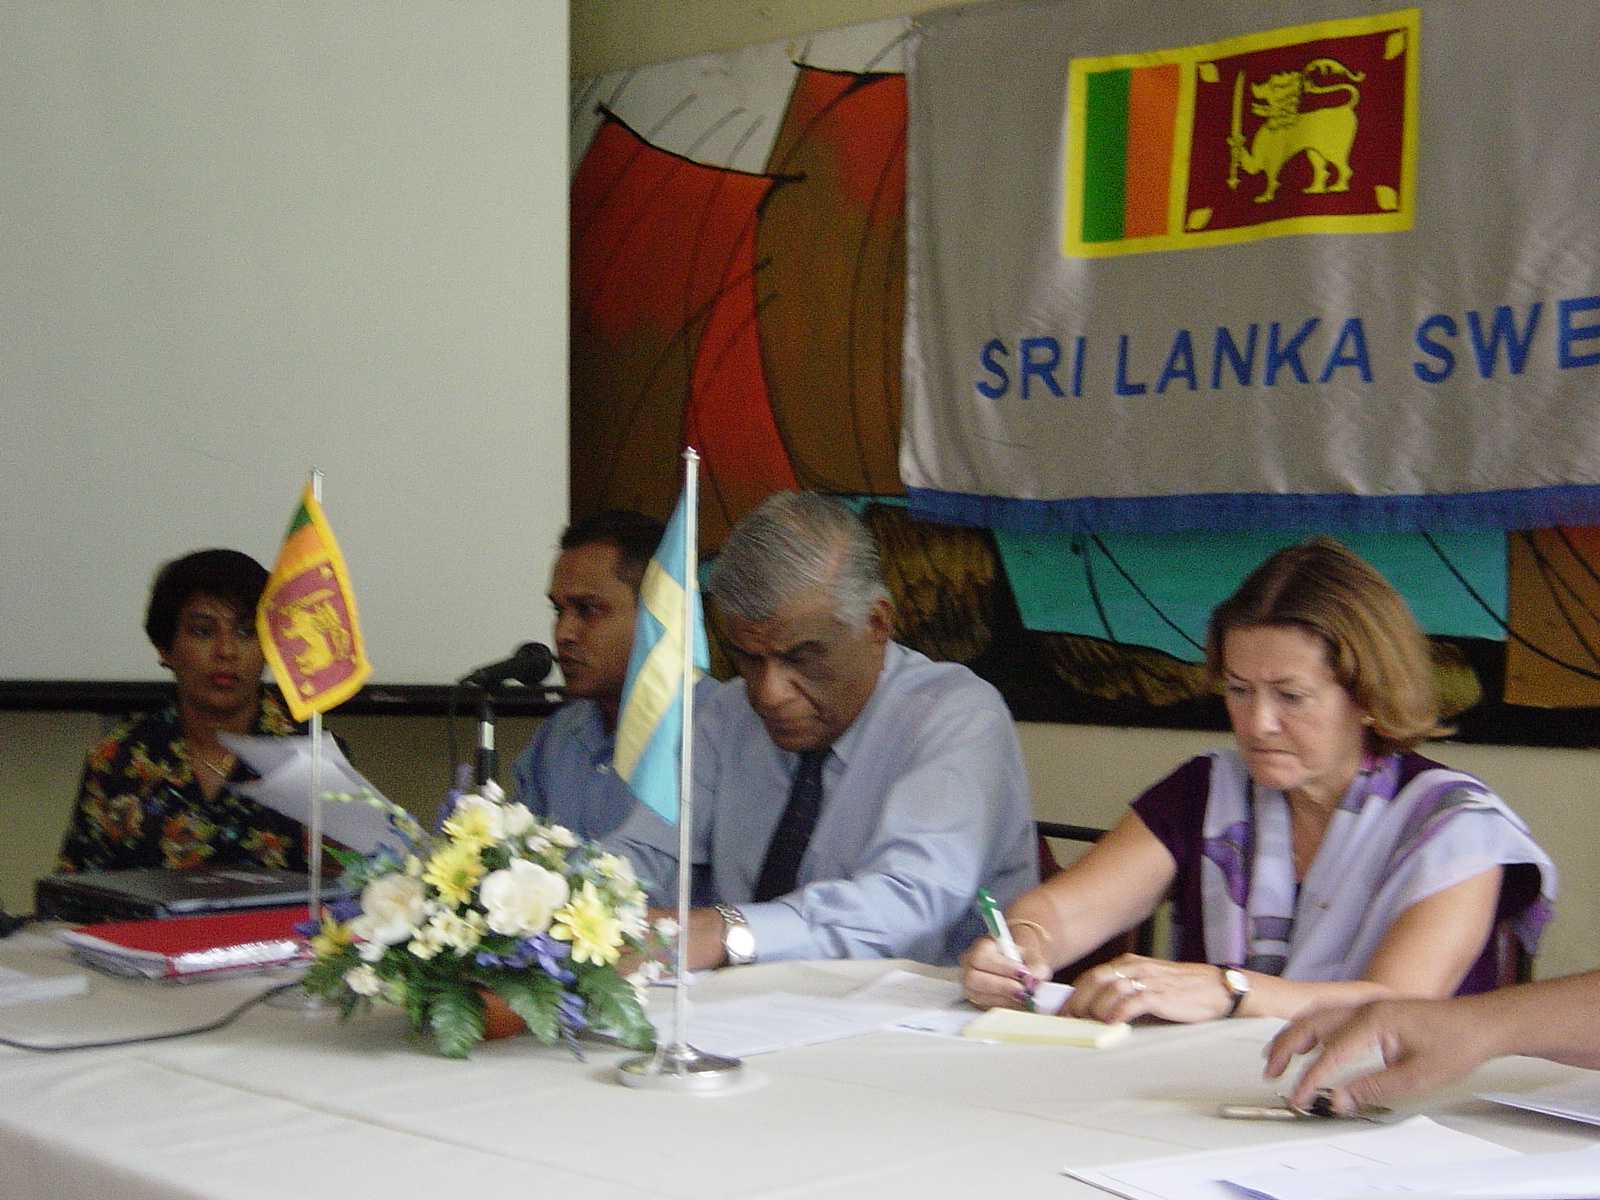 Presiding at the Annual General Meeting of the Sri Lanka Sweden Friendship Association as its President in 2005. On right Ms. Anne Marie Fallanius, Charge d’ Affairs, Swedish Embassy in Colombo